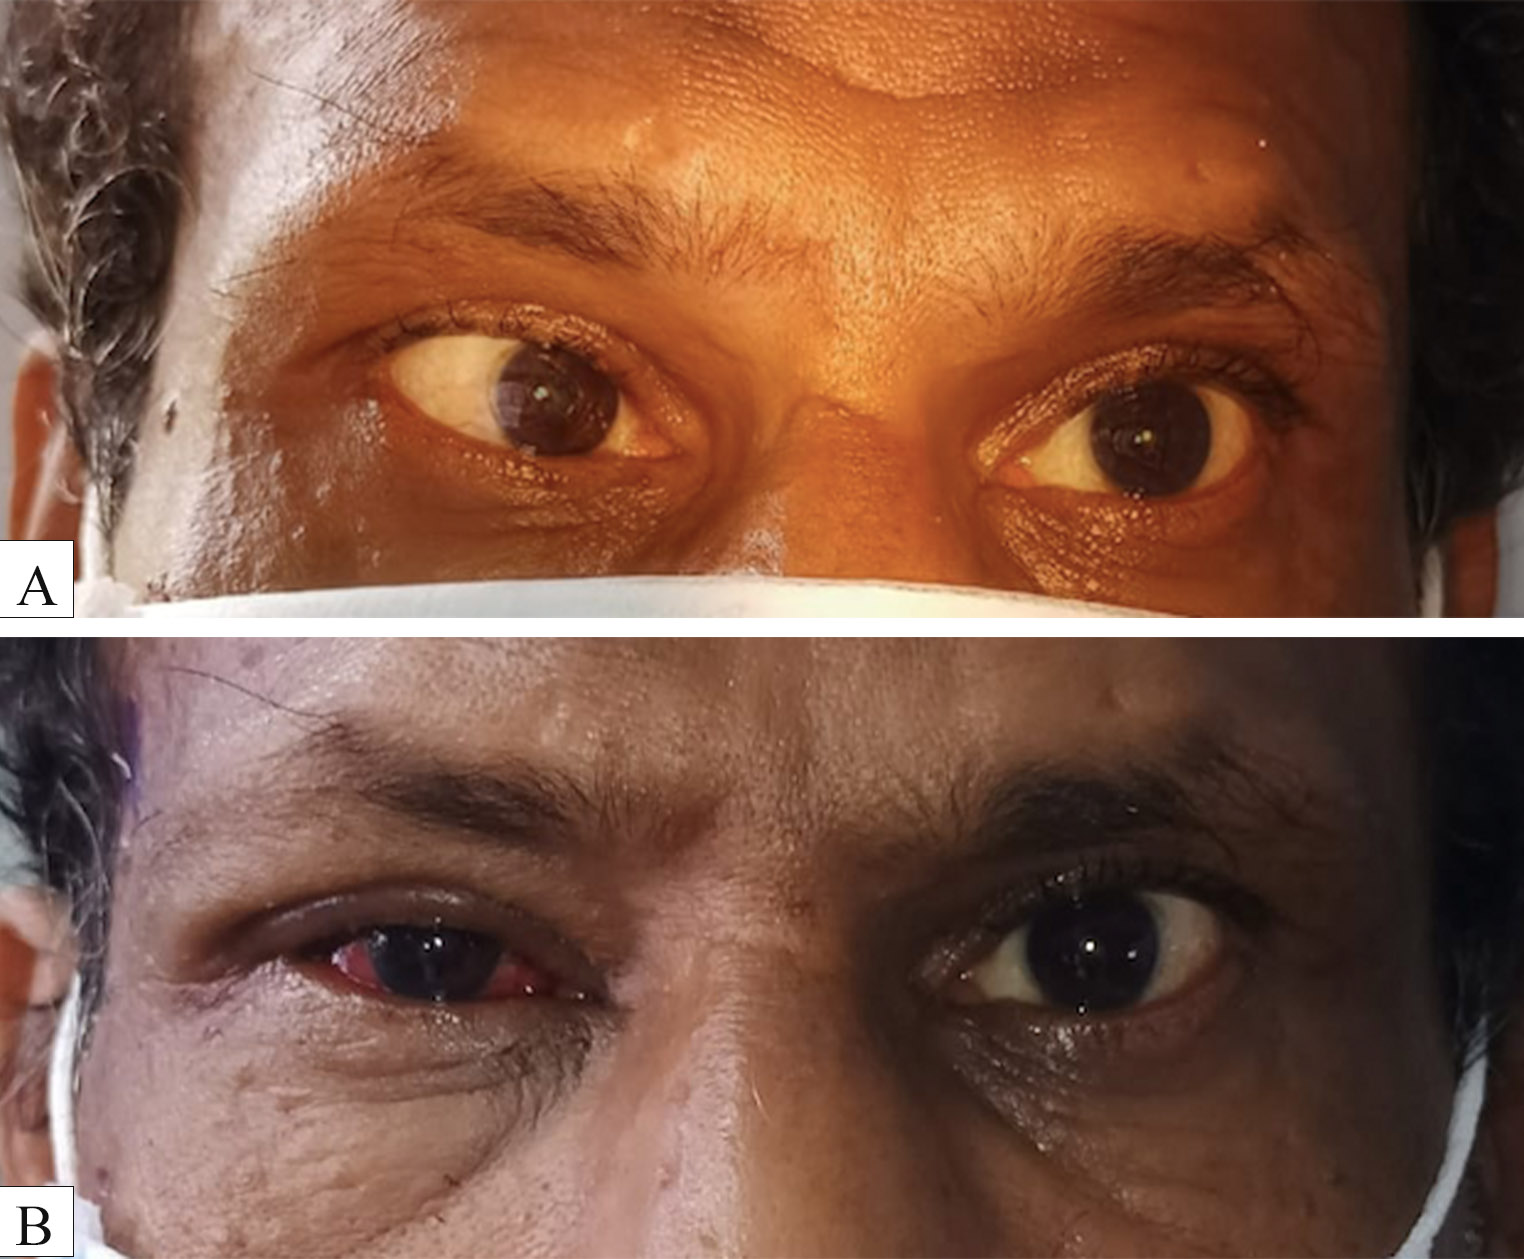 A. Digital preoperative image of a 50-year-old male patient depicting Hirschberg corneal reflex of 20 degree esotropia in the right eye B. Post operative day 1 image of the same patient depicting orthotropic Hirschberg corneal reflex after undergoing 5 mm medial rectus recession and 7 mm lateral rectus resection in the right eye 